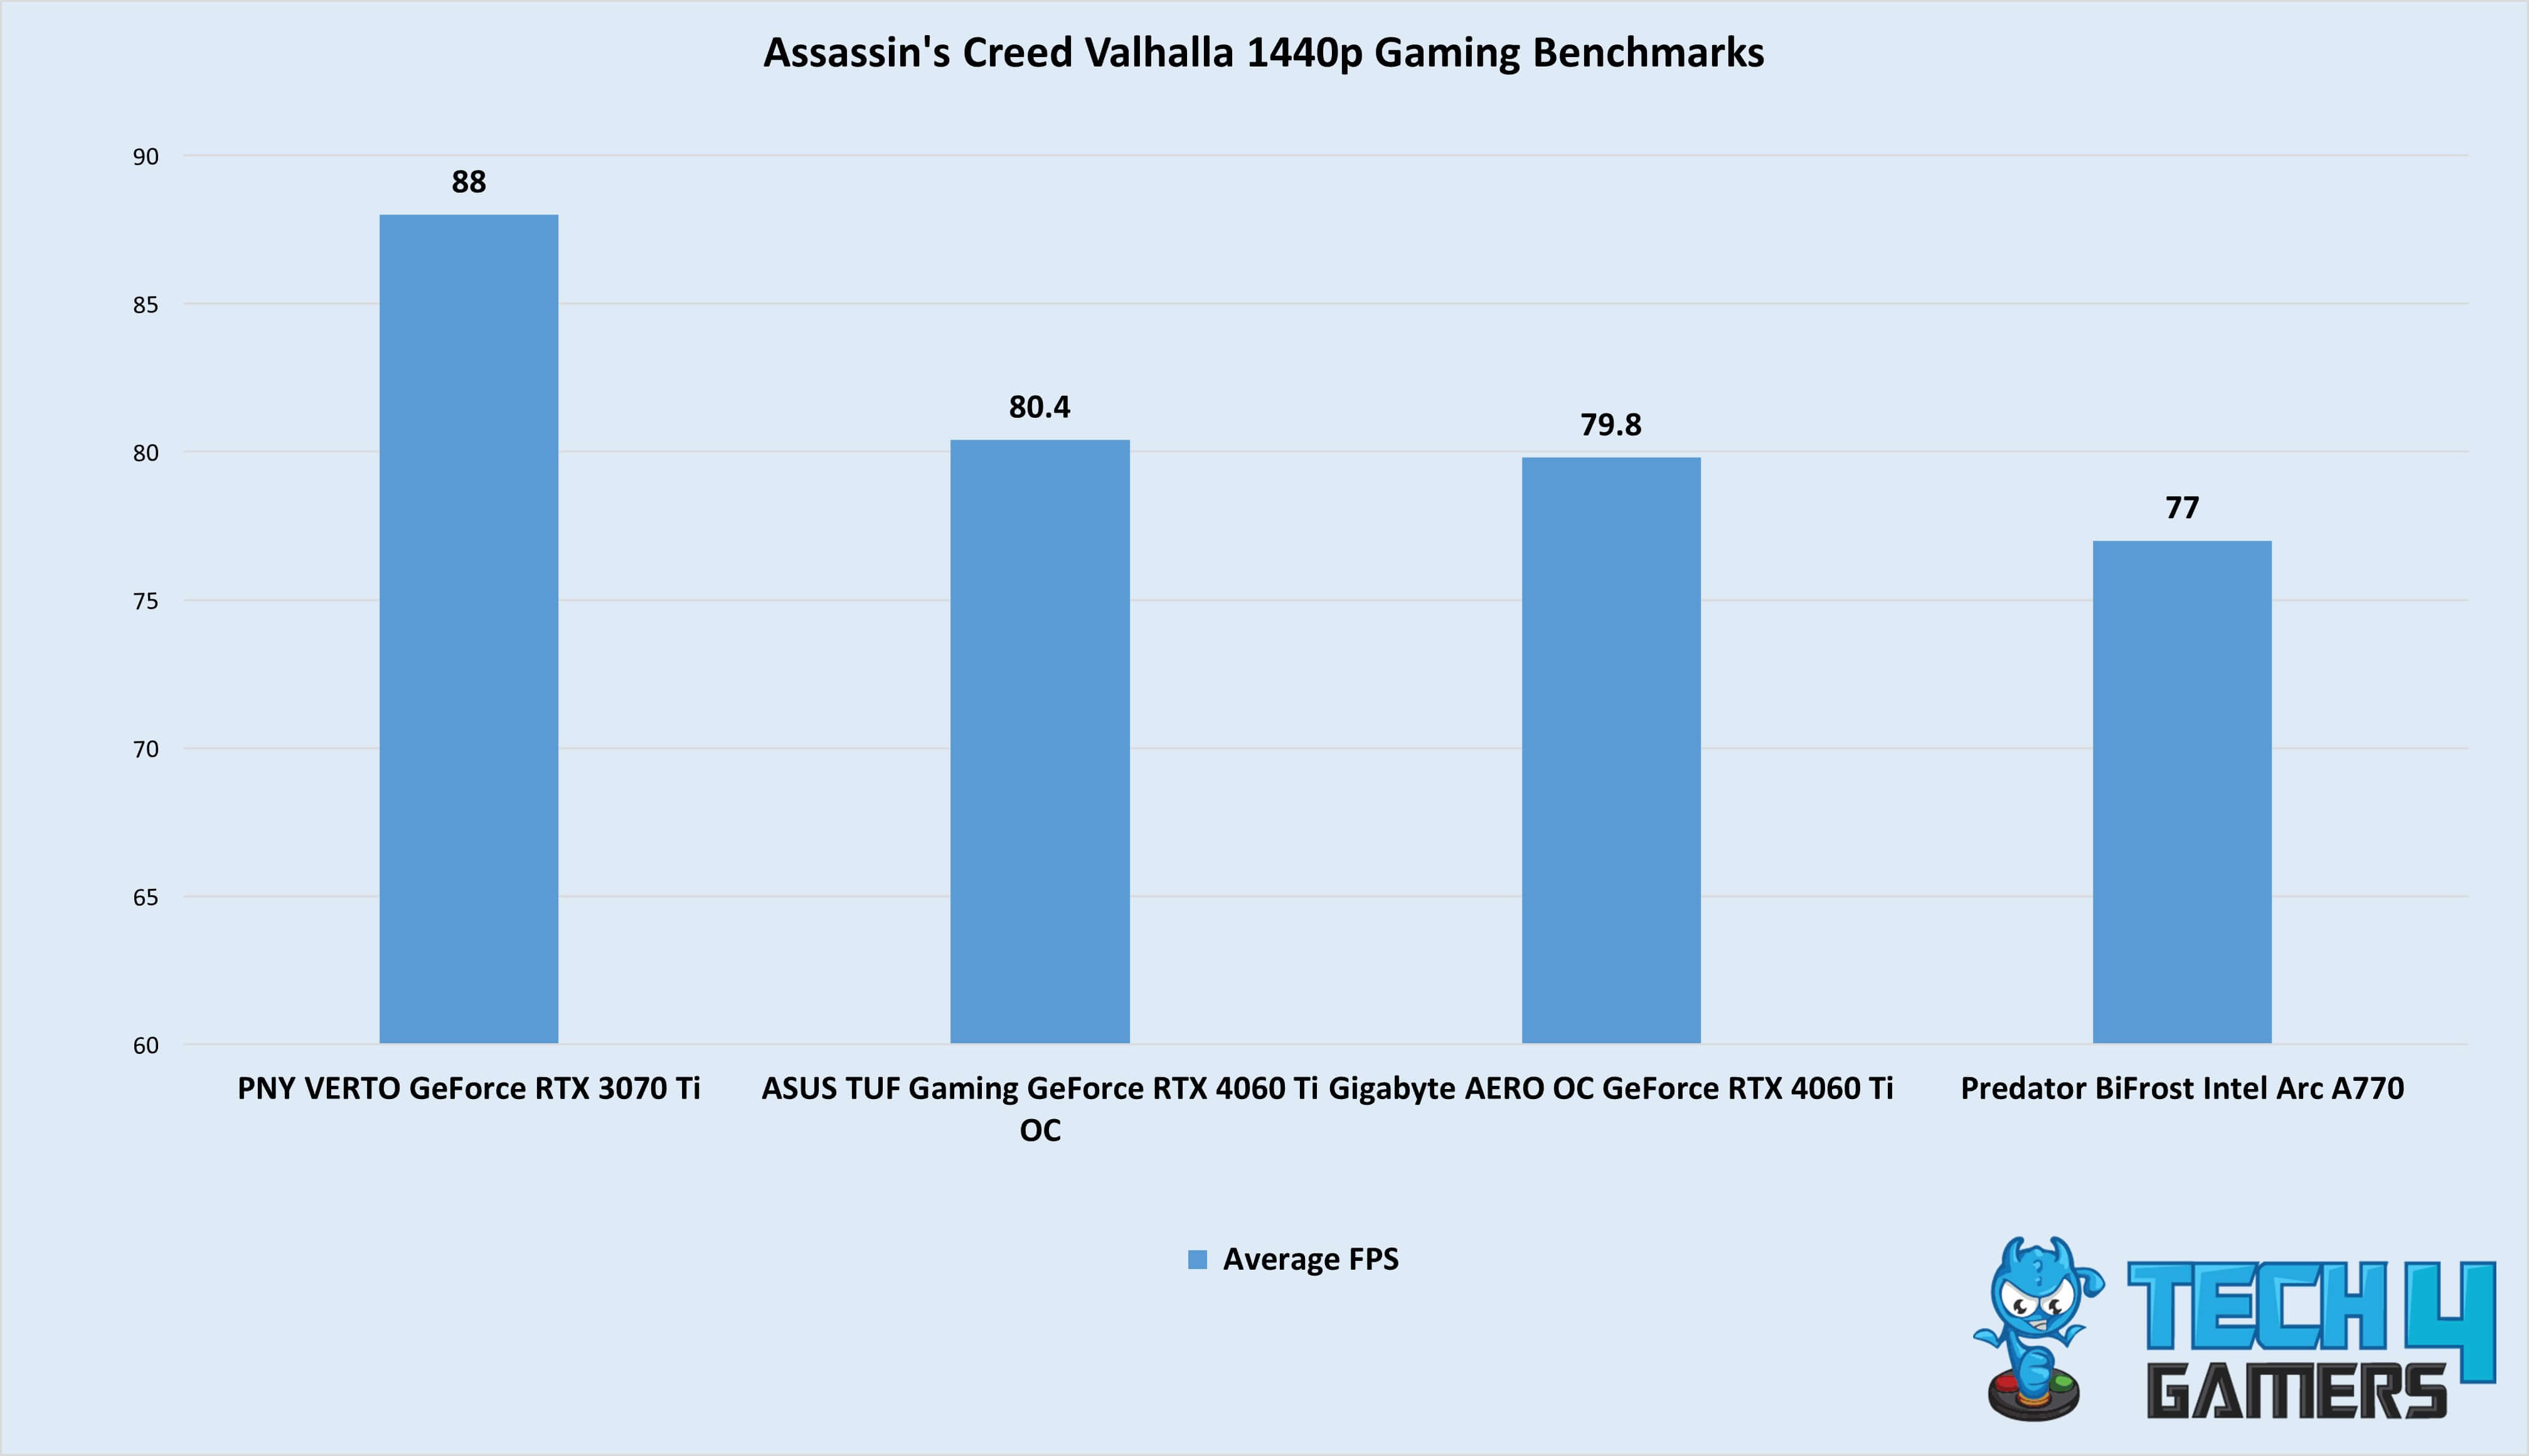 Assassin's Creed Valhalla 1440p Gaming Benchmarks